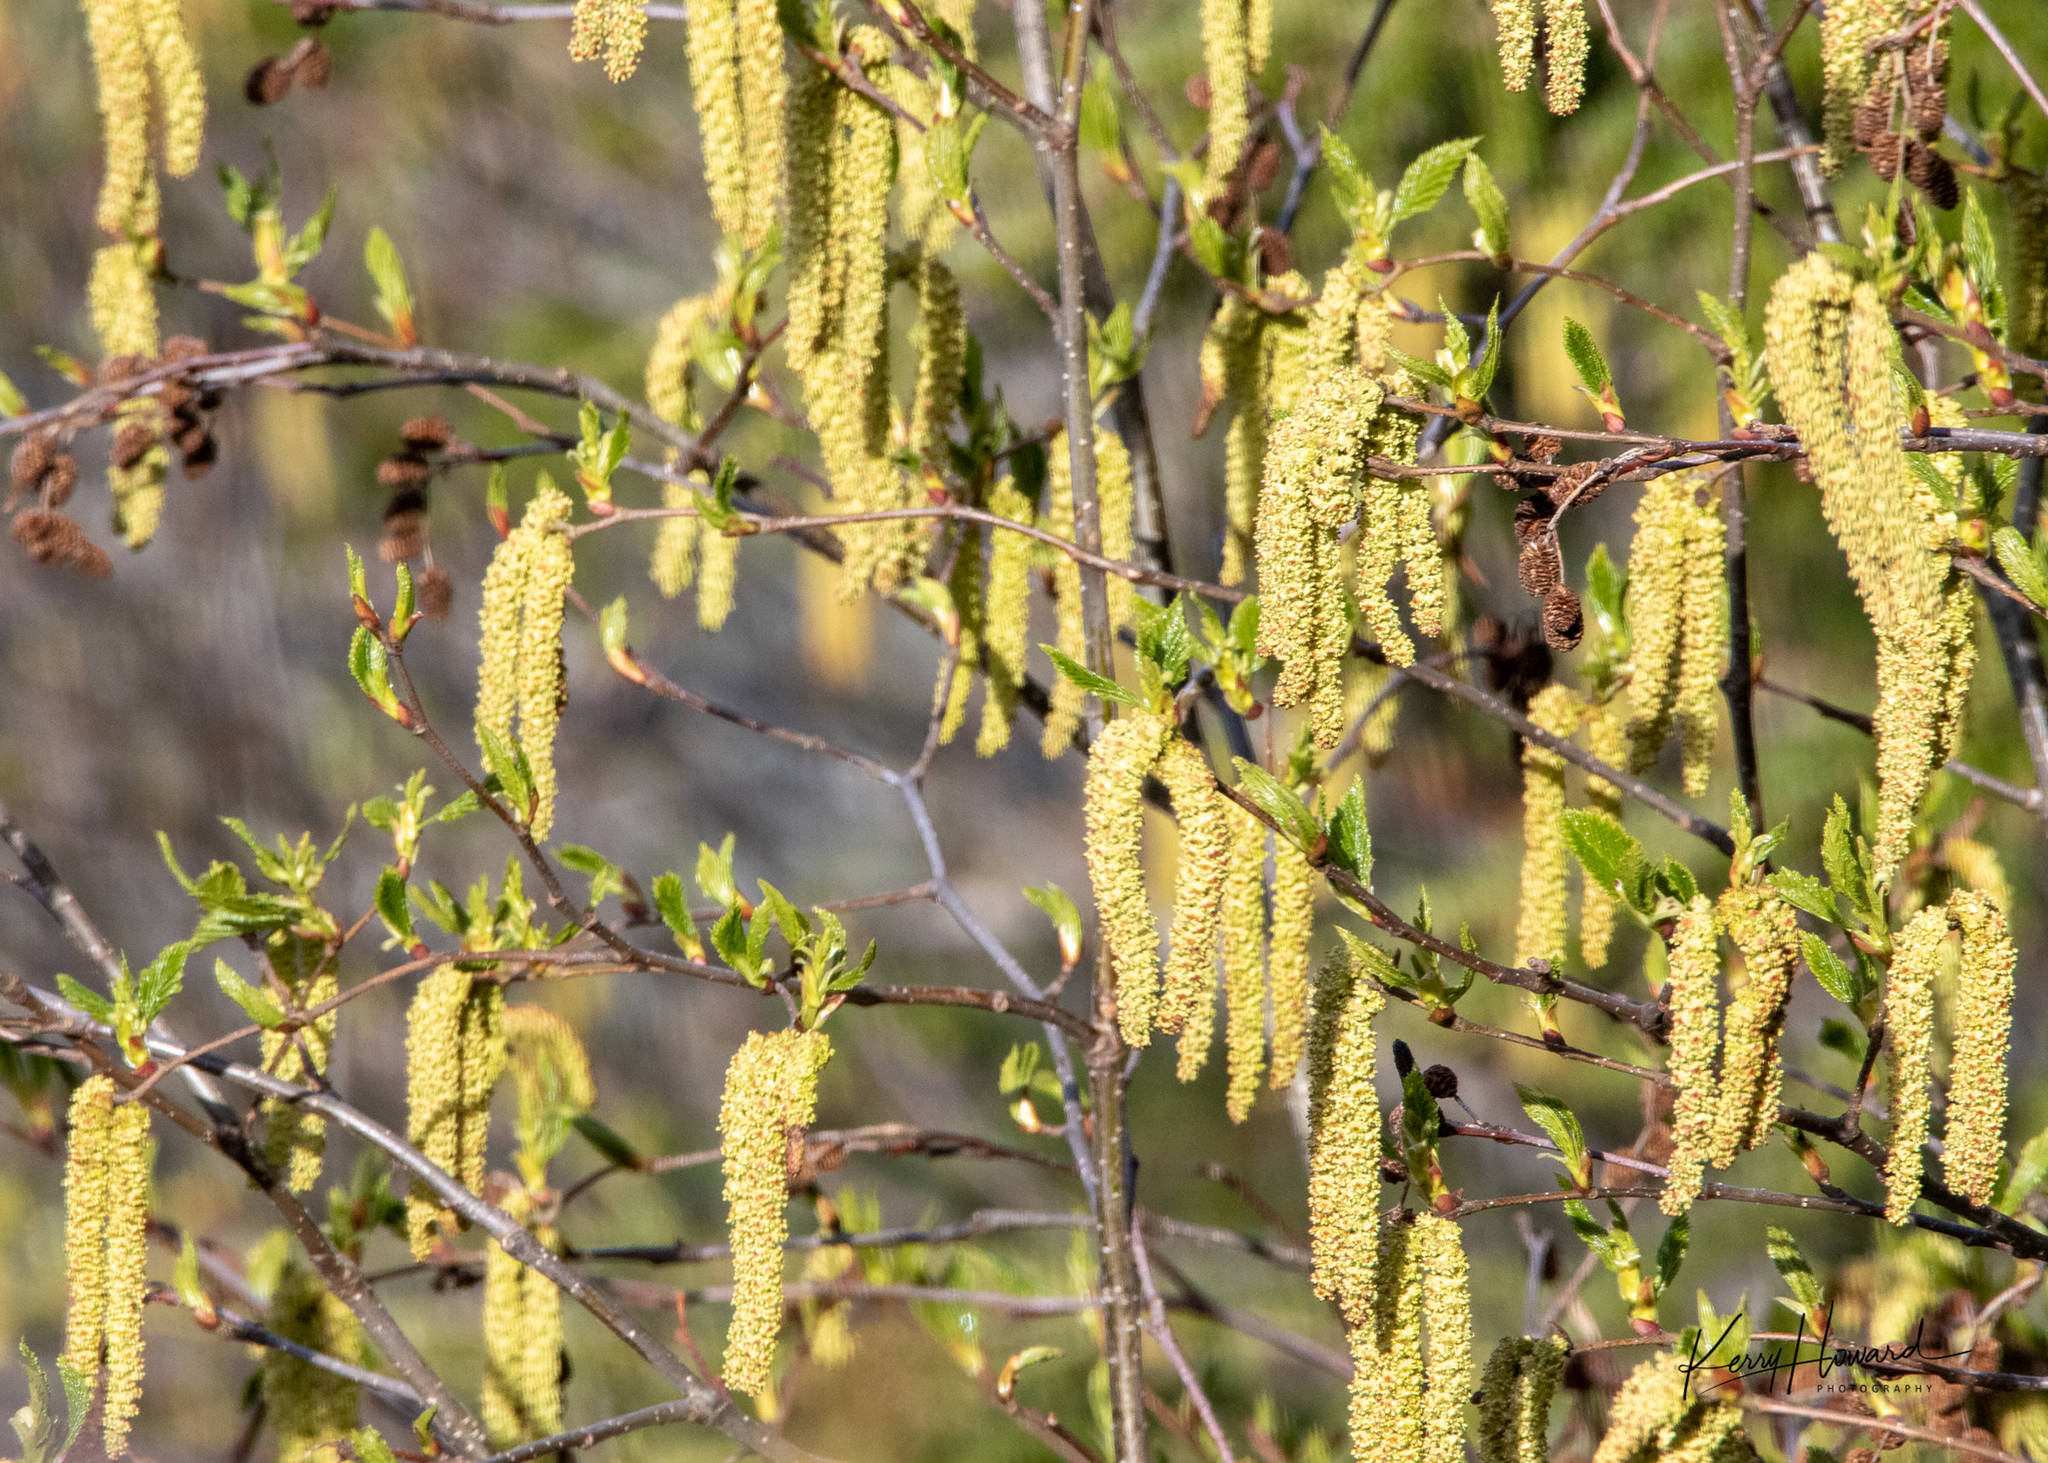 Clusters of colorful alder catkins on May 1, 2019. (Courtesy Photo | Kerry Howard)